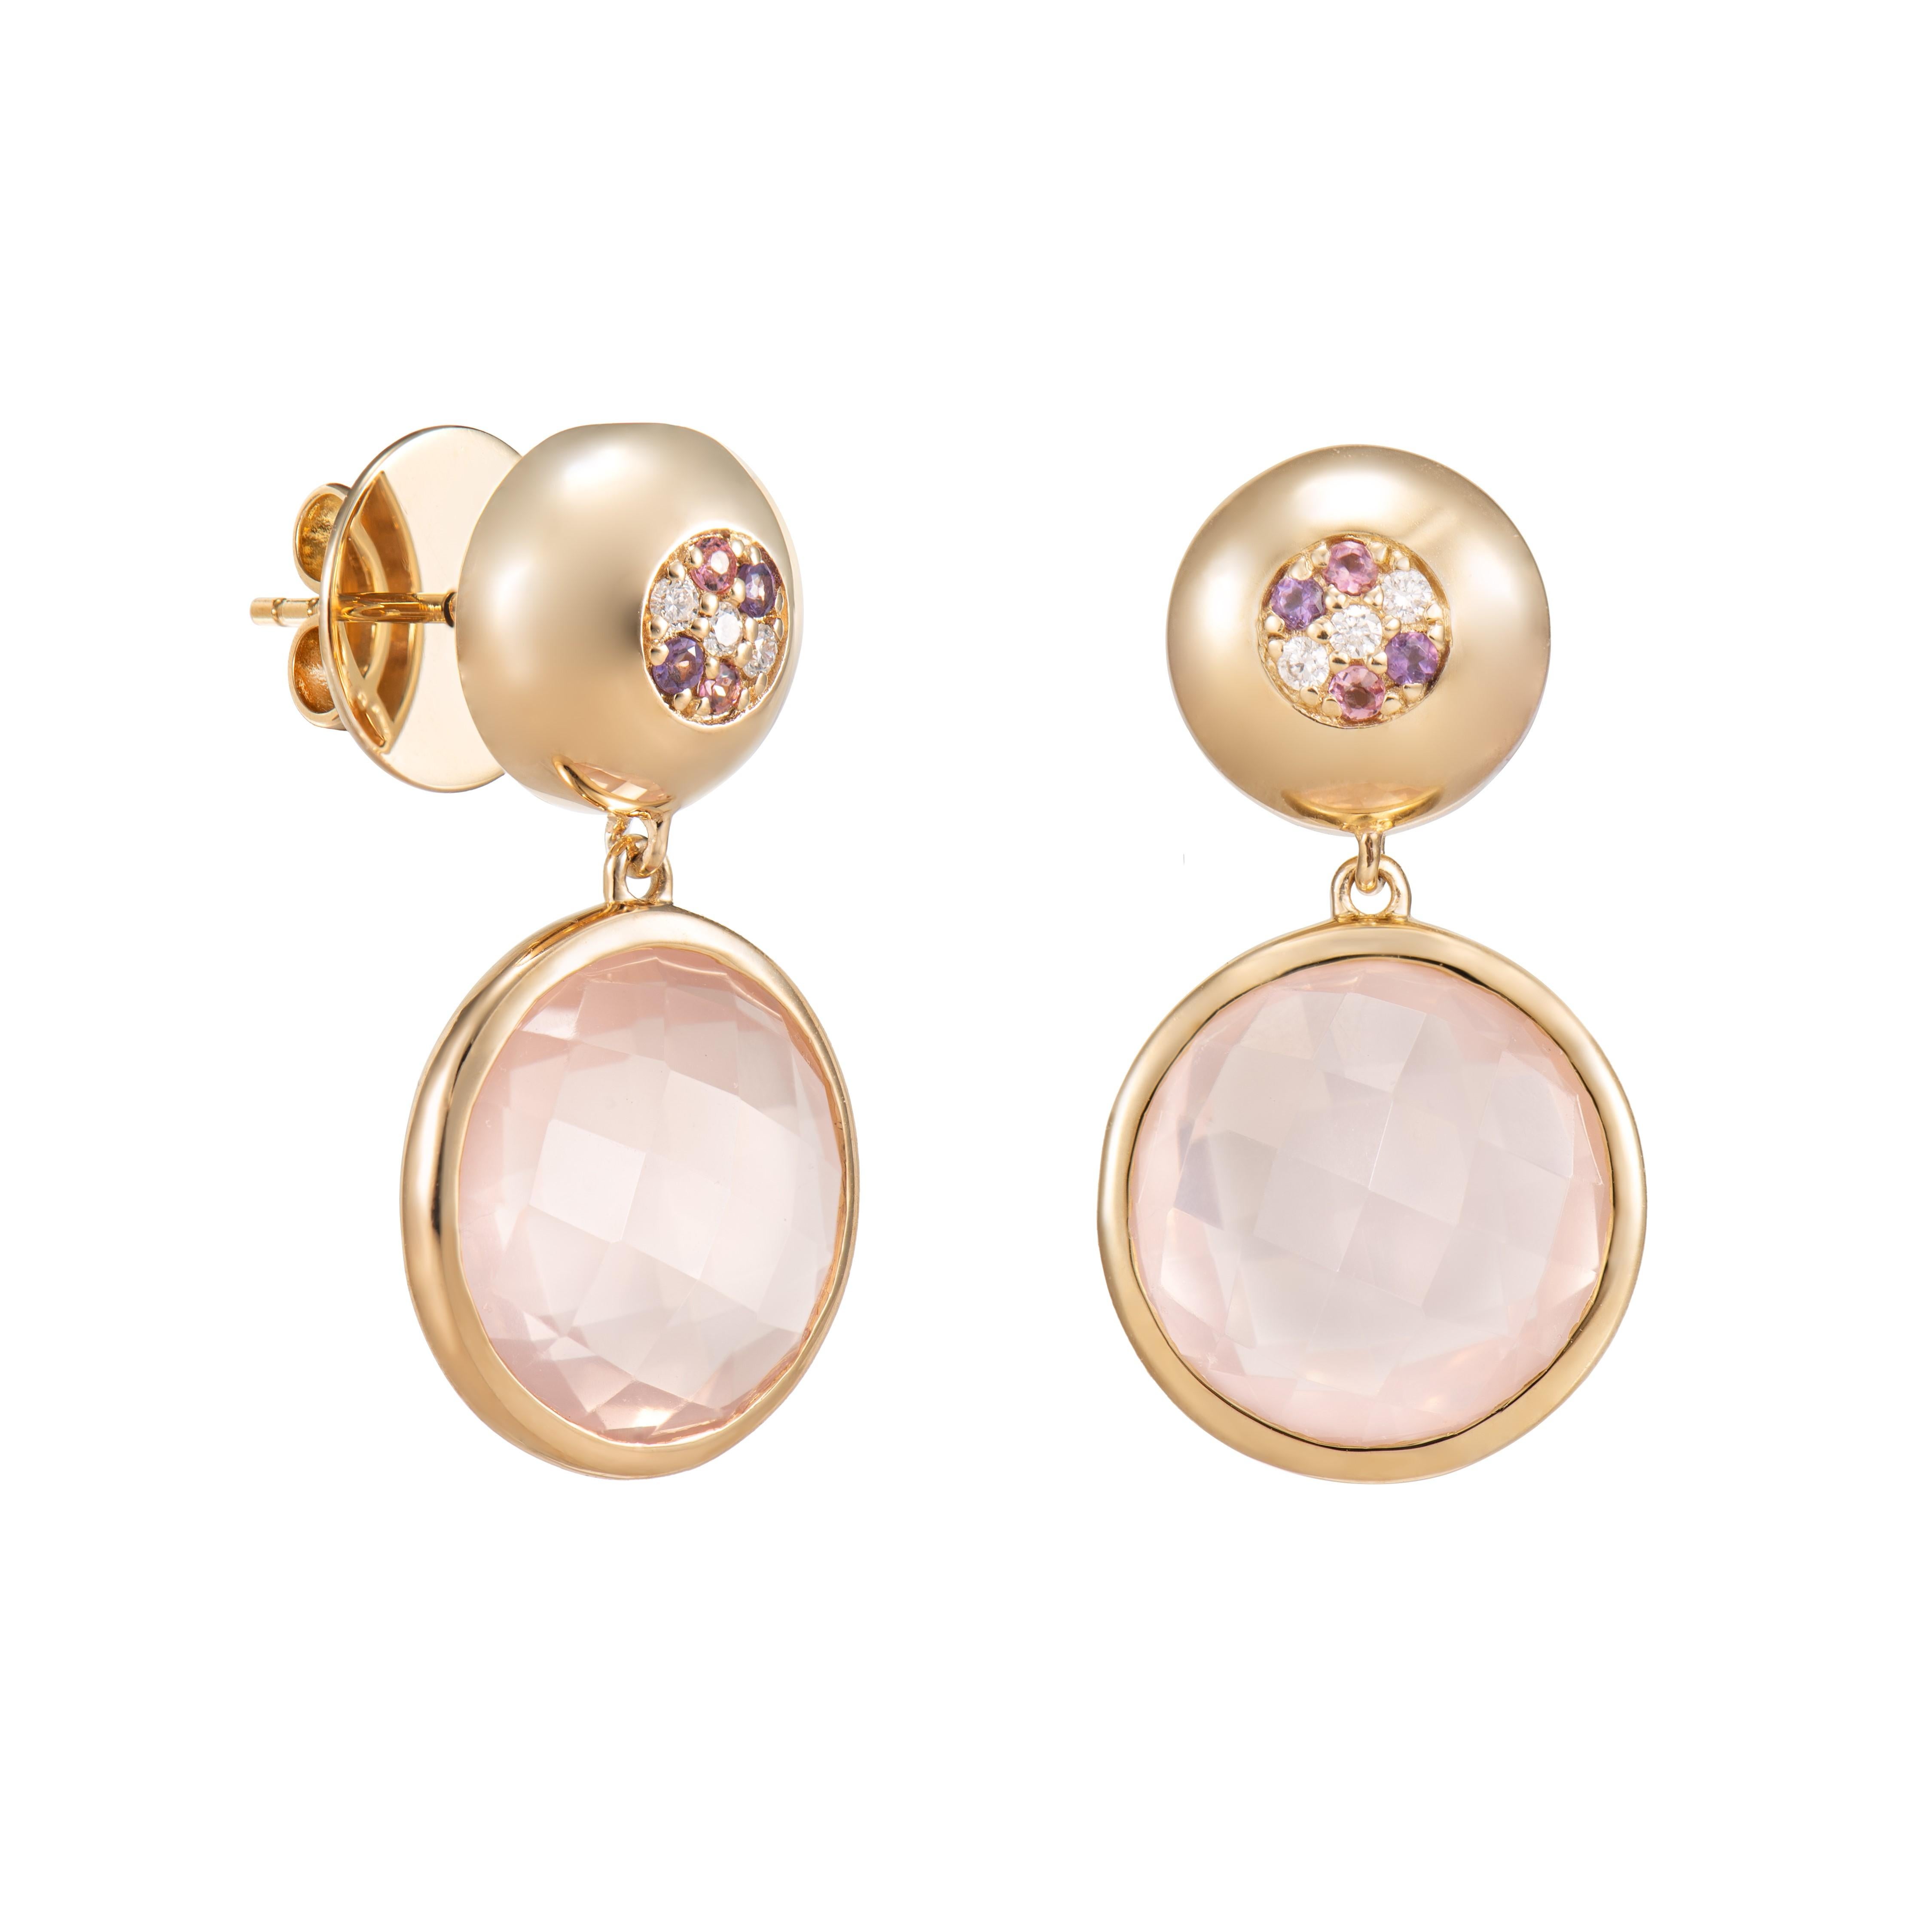 These are fancy Rose Quartz Drop earrings in a Round shape with Checkerboard Cut with Rose hue. The stud earrings are elegant and can be worn for many Occasions.

19.54 Carat Rose Quartz Drop Earring in 18Karat Yellow Gold with Pink Tourmaline,